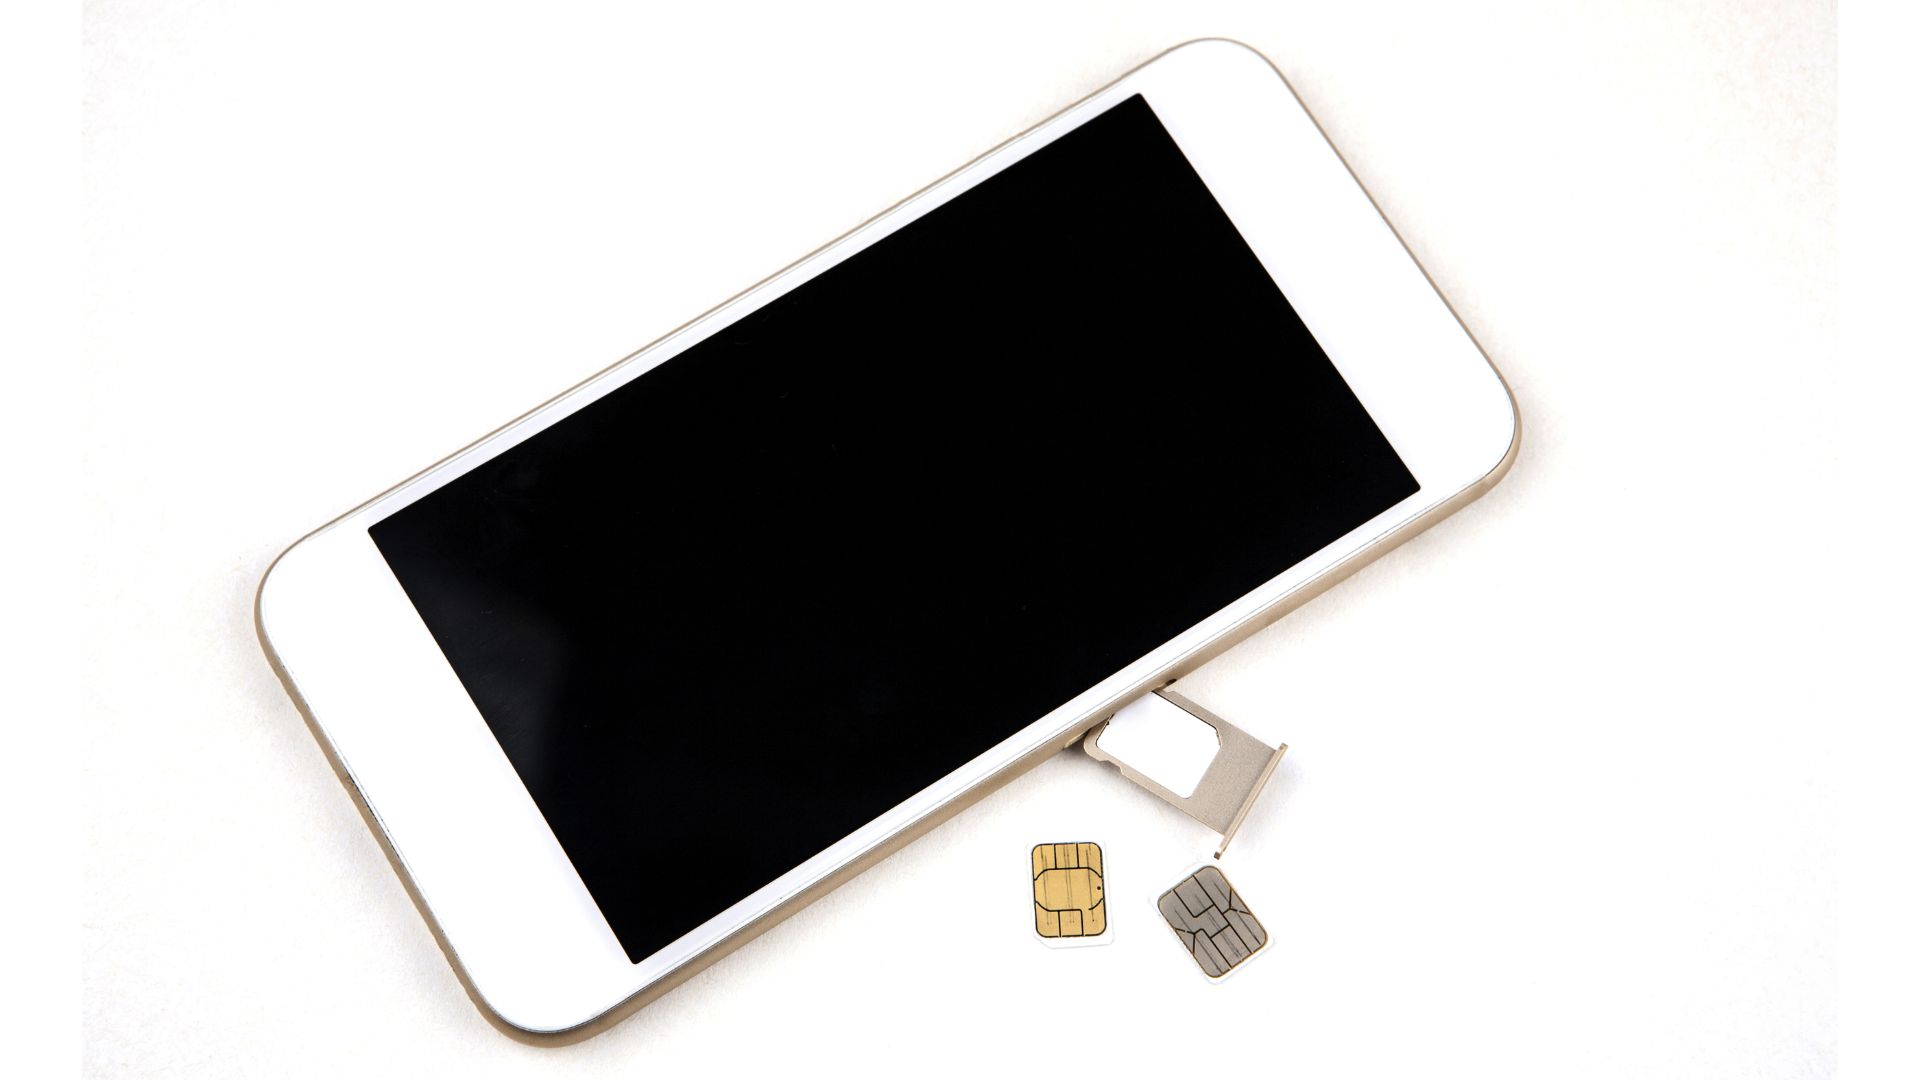 identifying-the-right-sim-card-type-for-iphone-5s